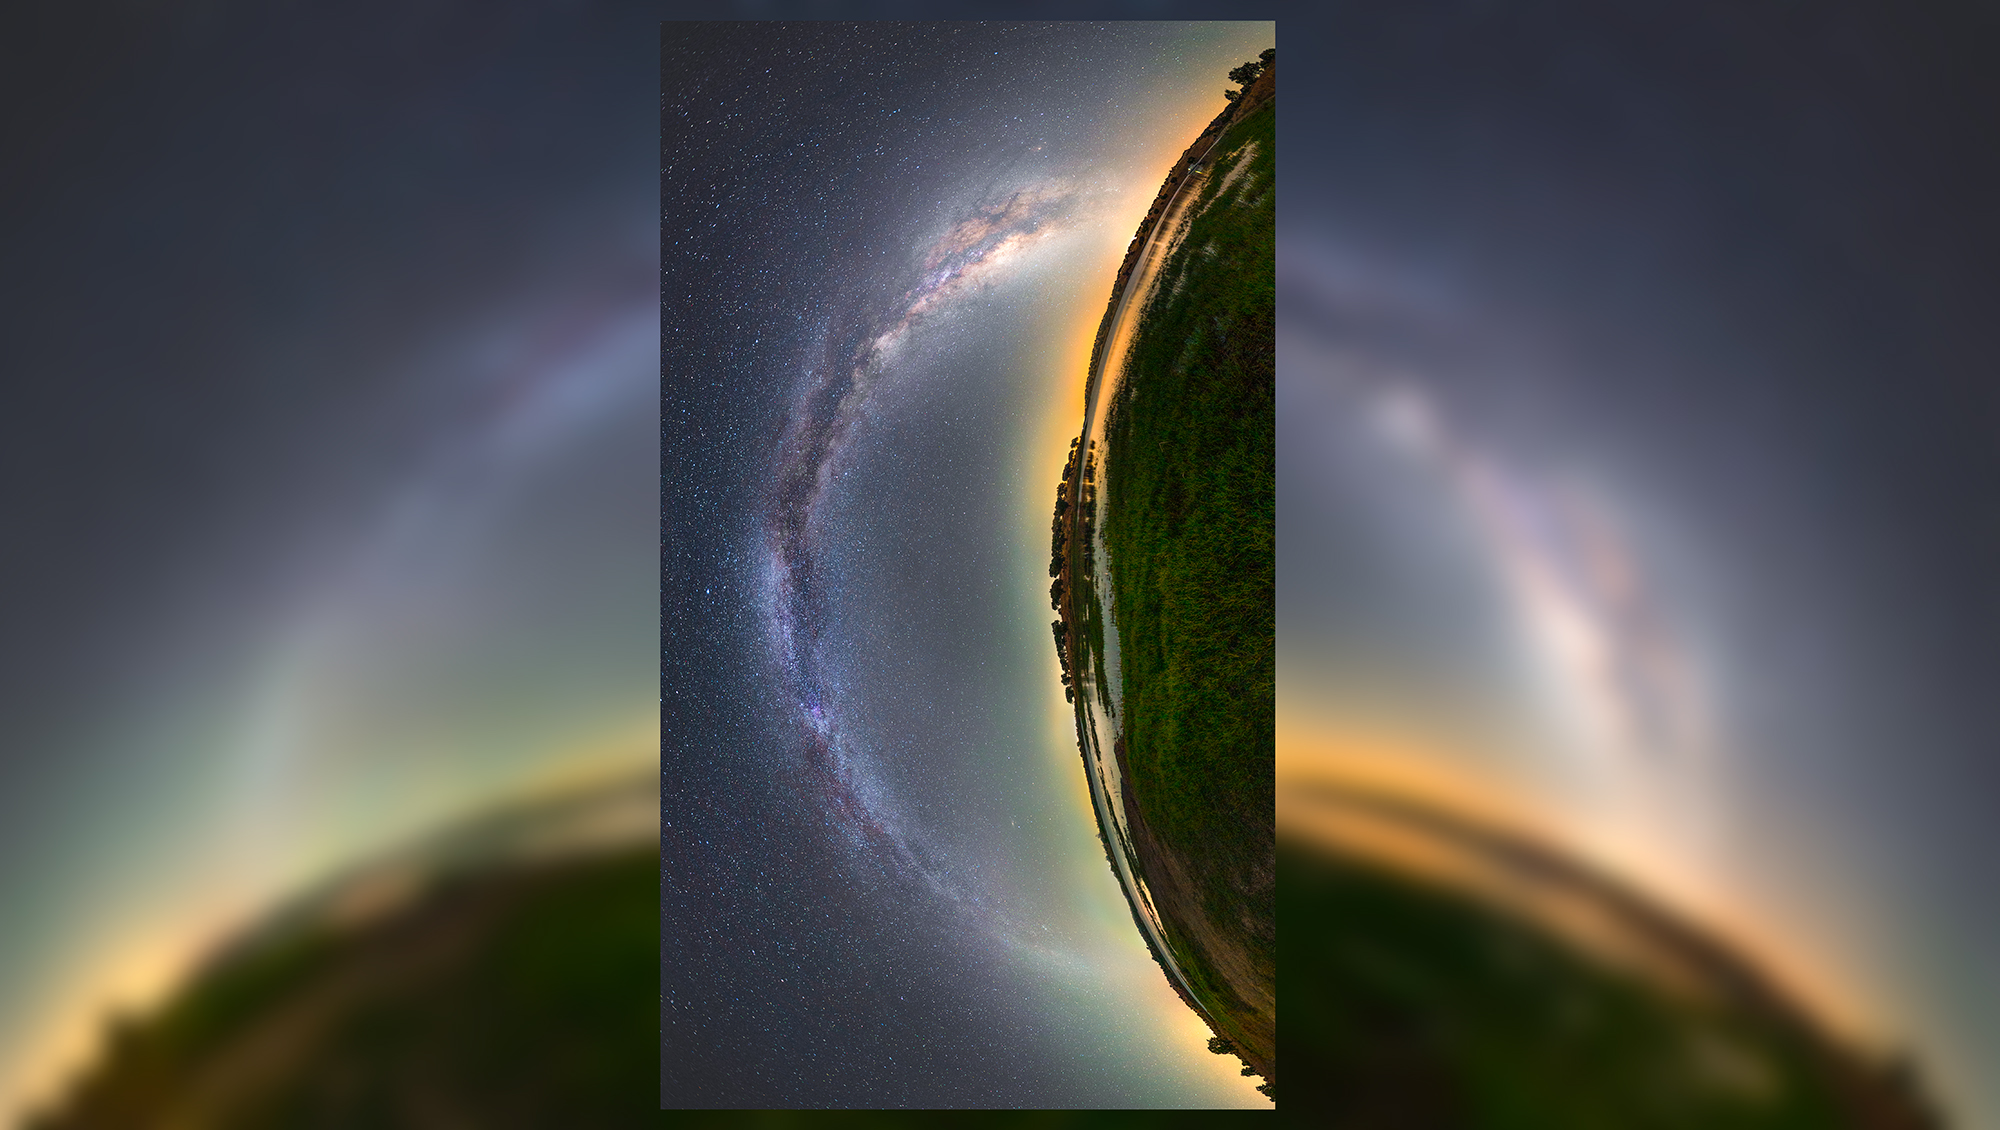  Astrophotographer peers into a cosmic 'eye' looking out into the universe 